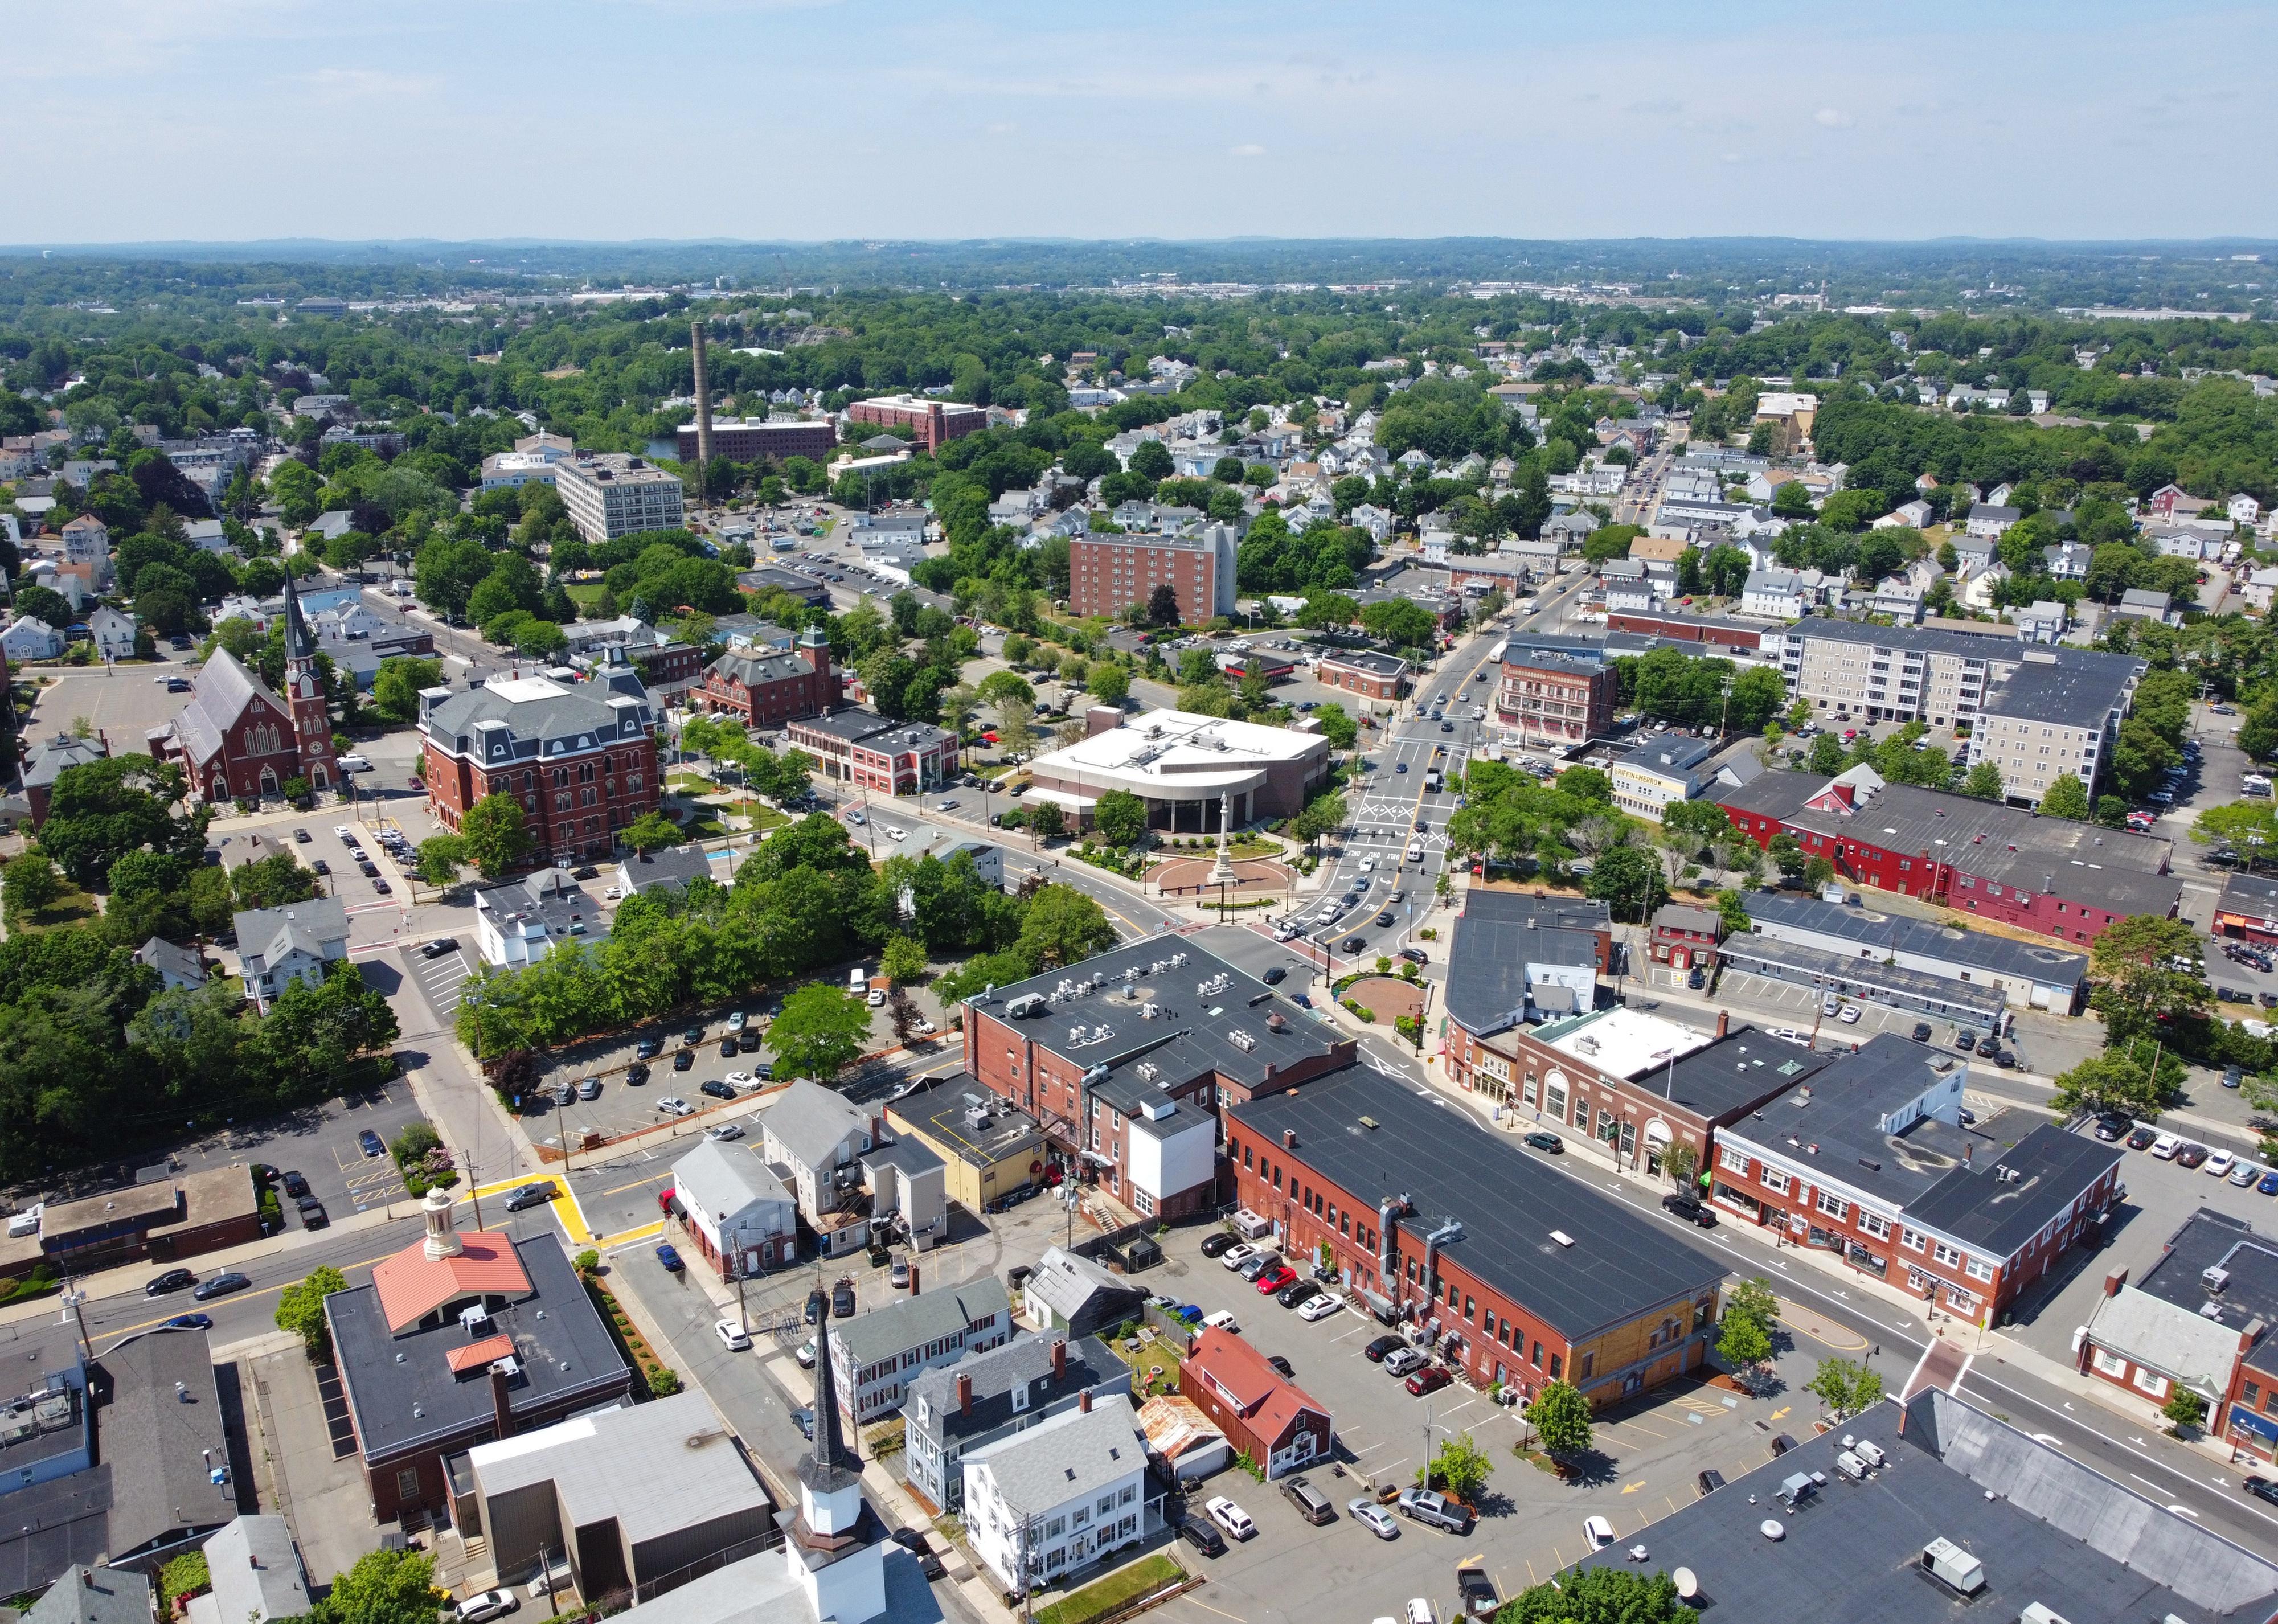 Aerial view of historic commercial buildings on Main Street in downtown Peabody